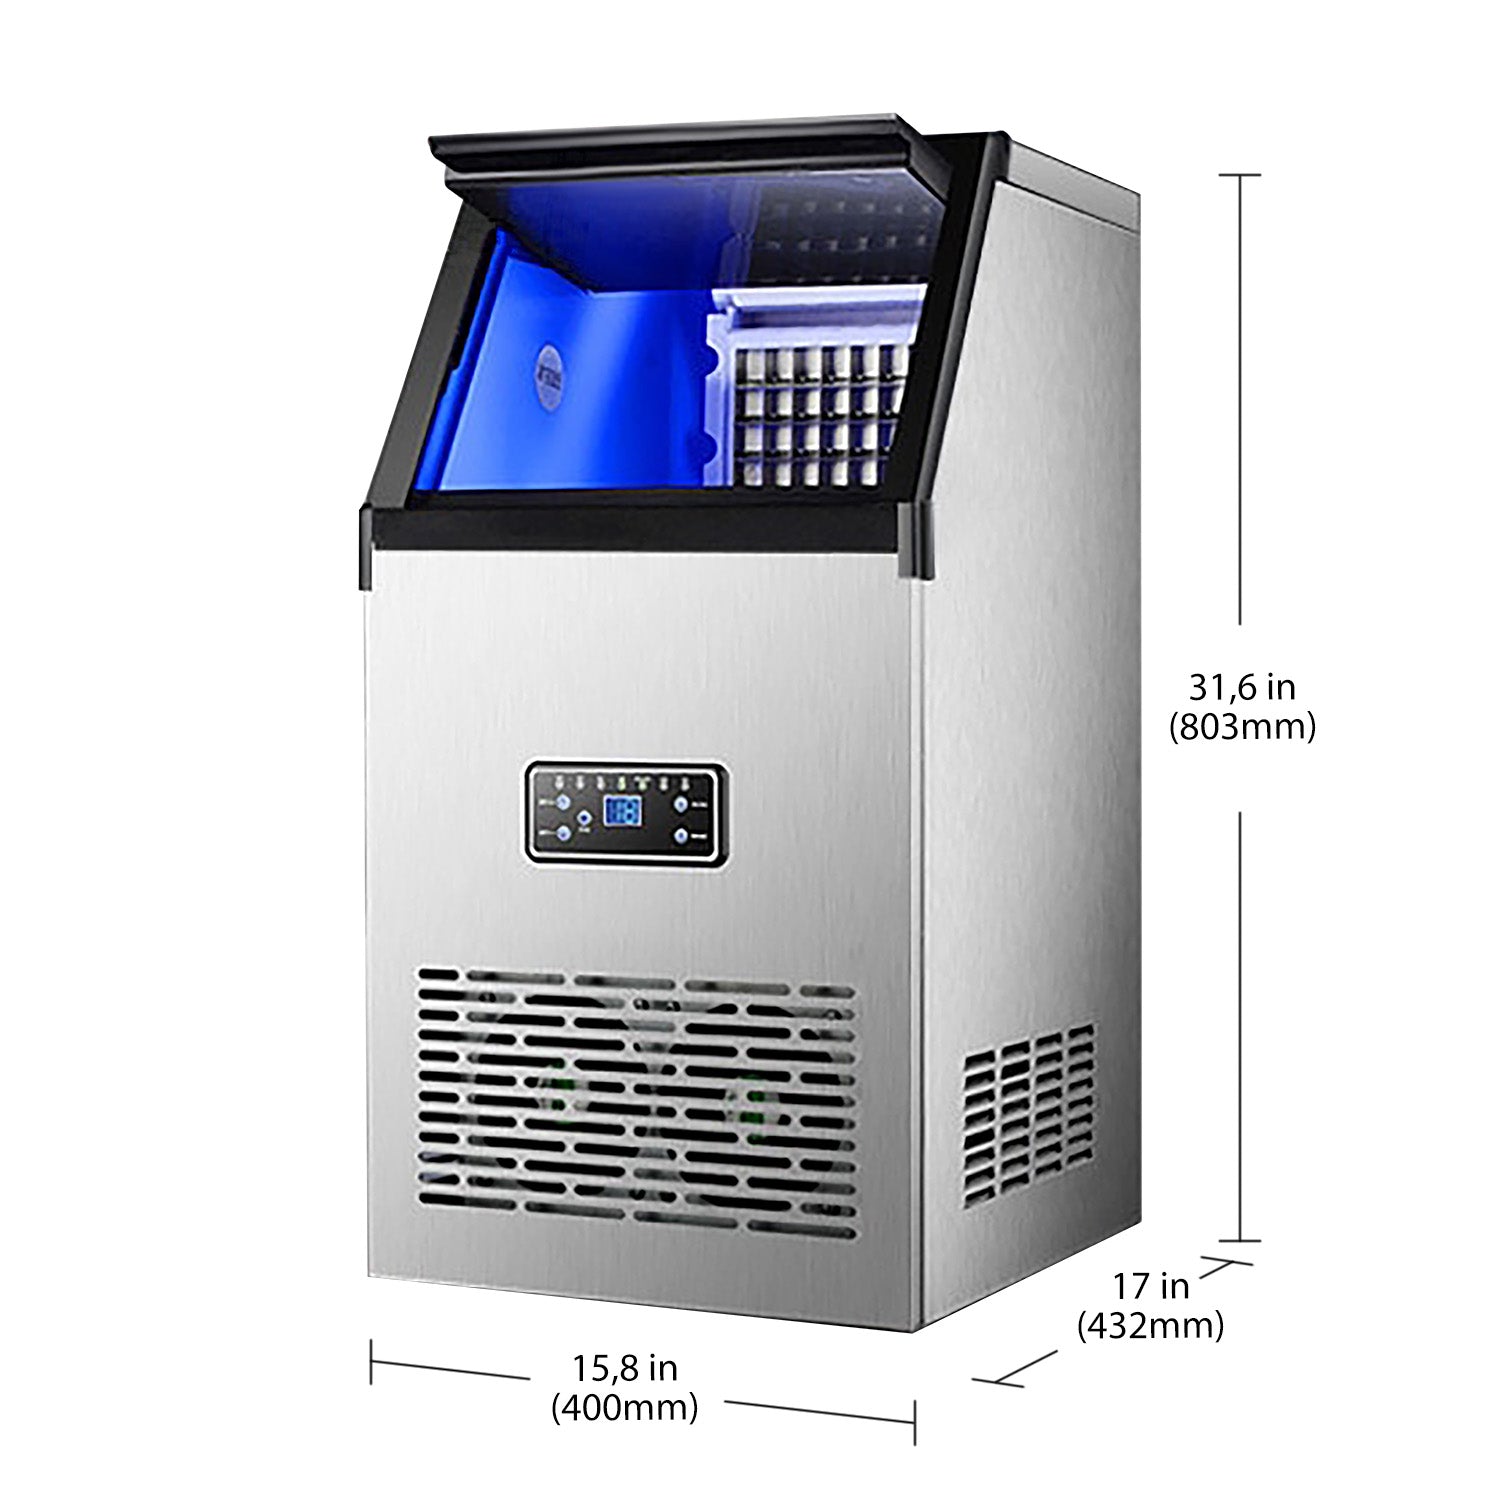 A-GK80 Commercial Ice Maker | 80 KG per 24H | Automatic Ice Making Machine with Scoop and Connection Hoses